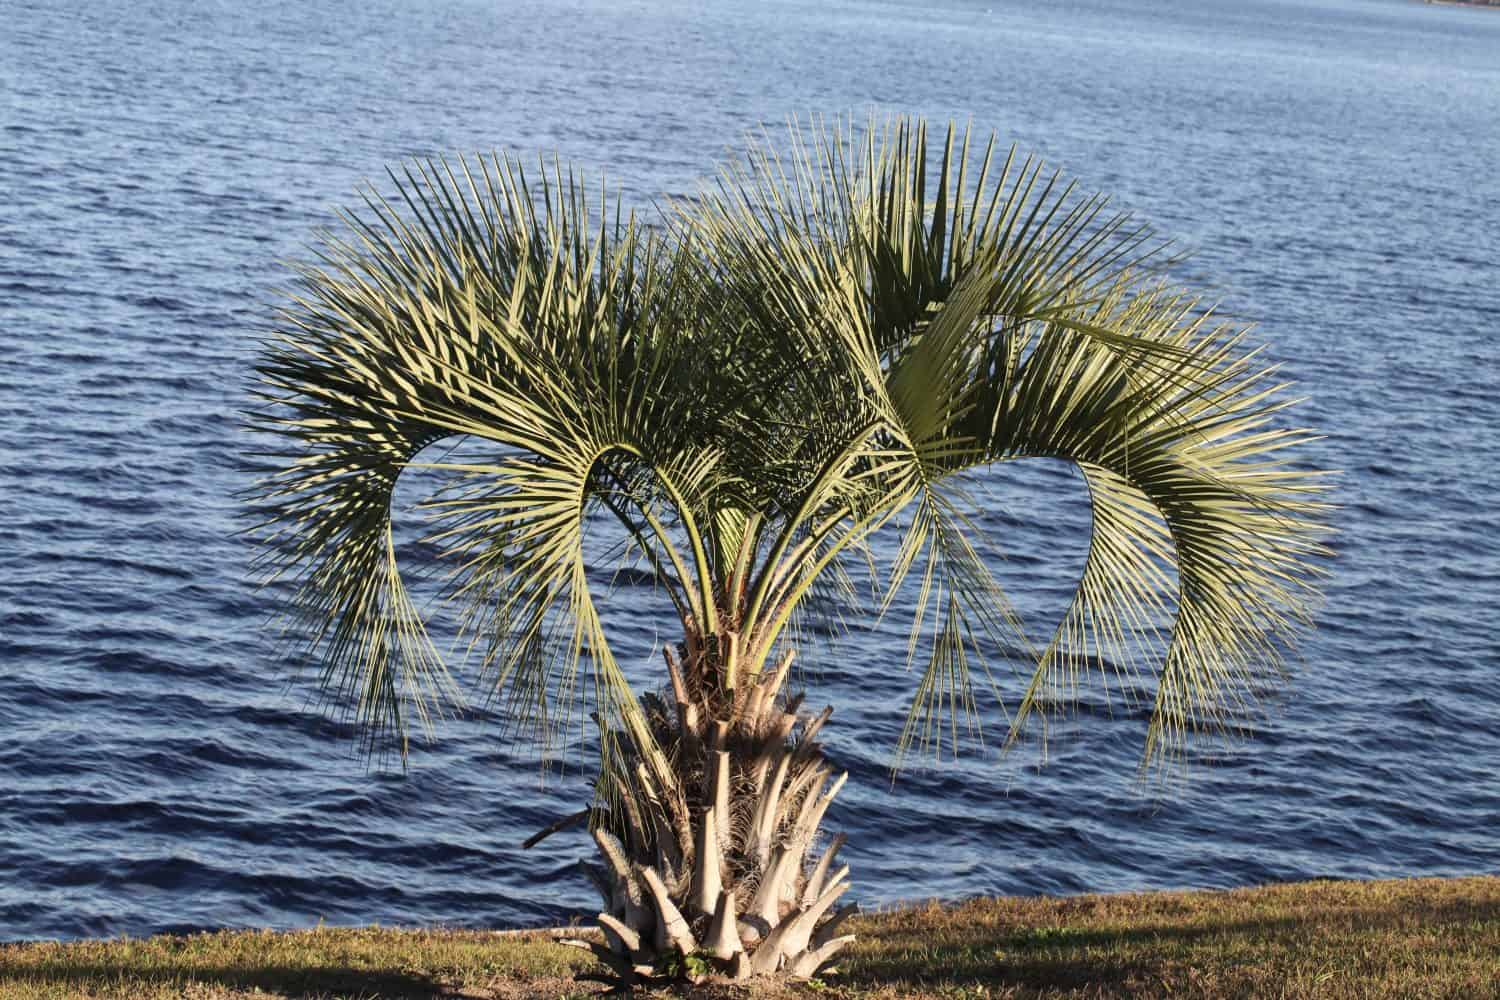 The pindo palm’s other common name is jelly palm